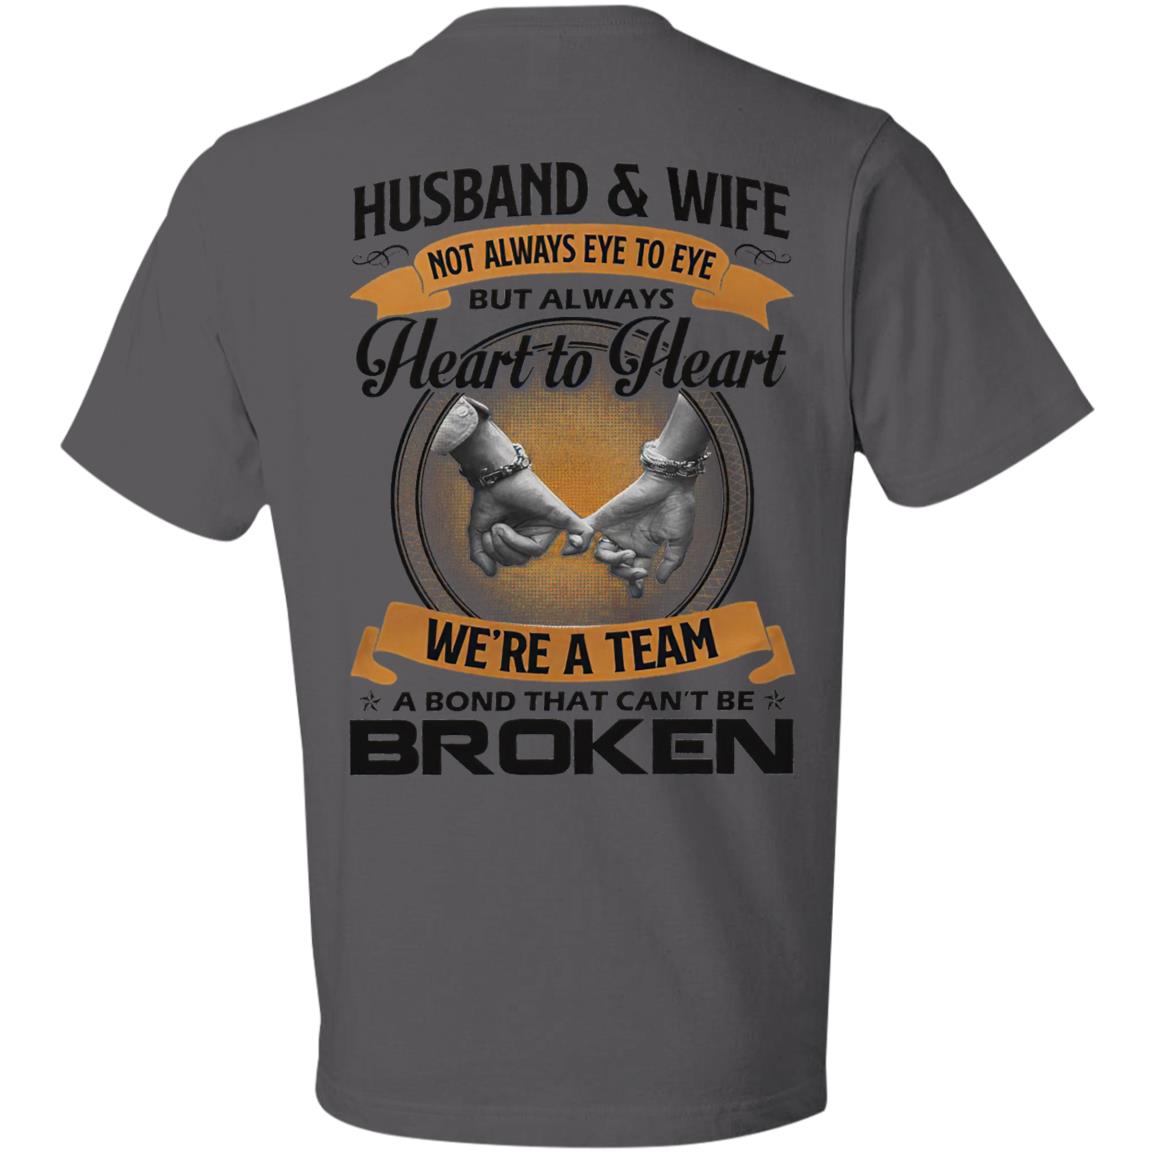 Husband And Wife Always Heart To Heart Classic T-Shirt2